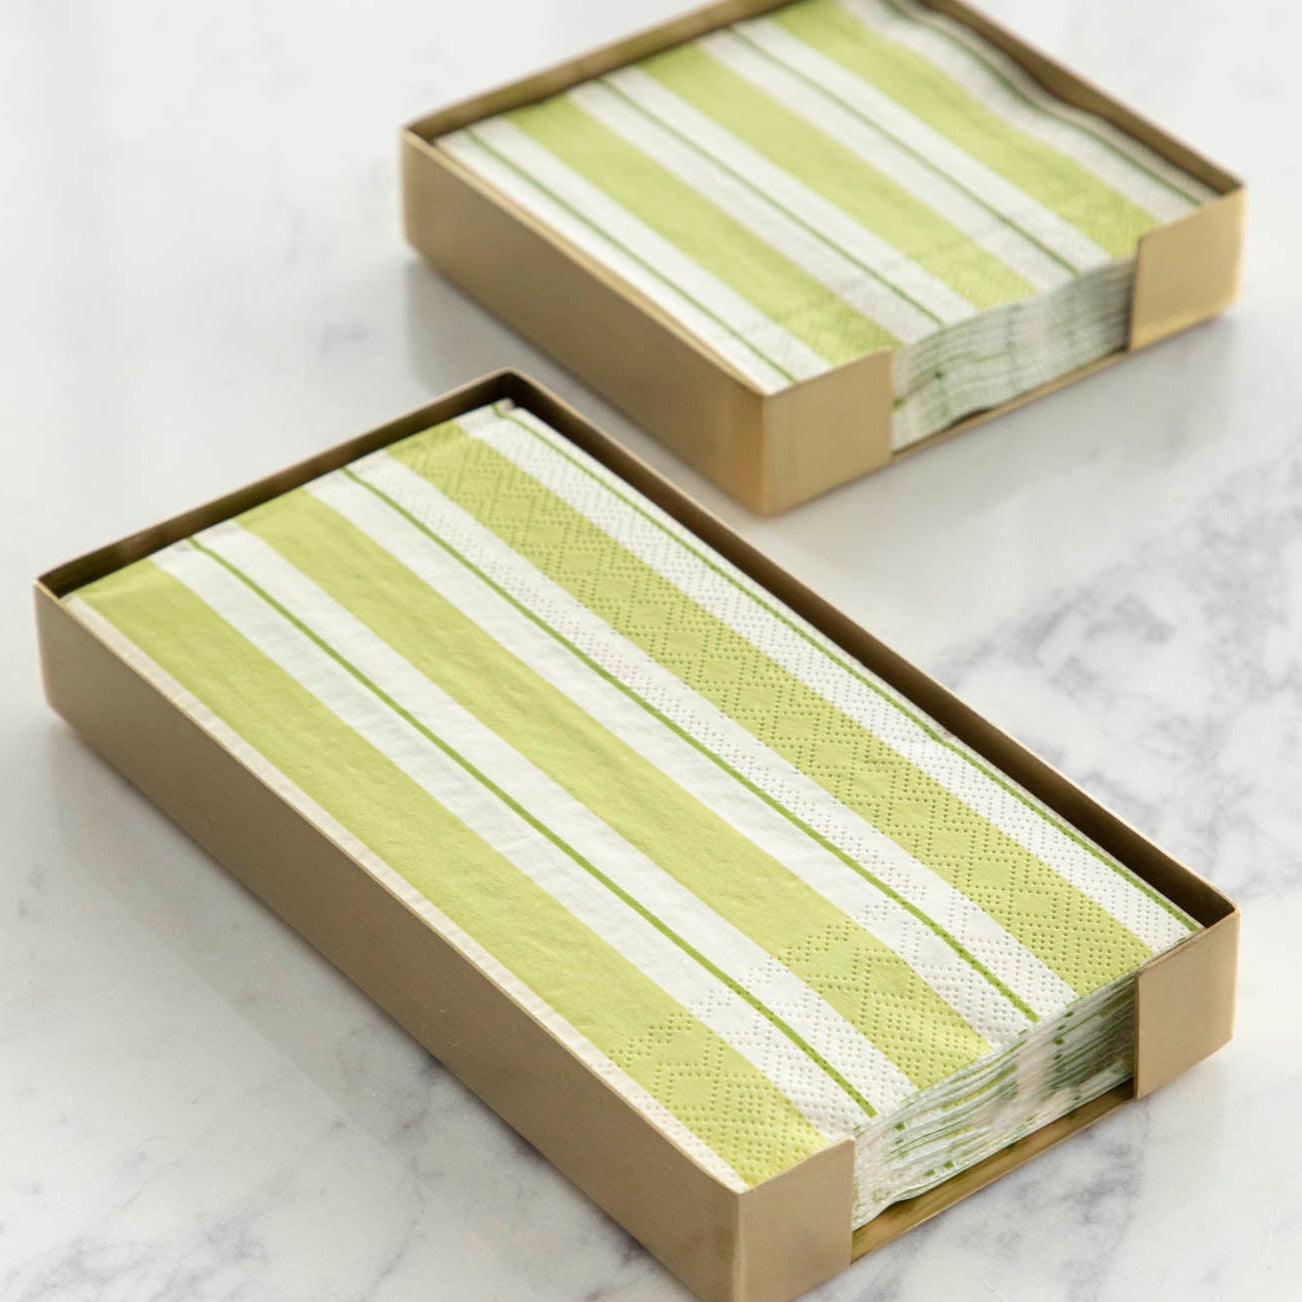 Two Brass Napkin Holders, guest-sized and cocktail-sized, containing green striped napkins on a white table.